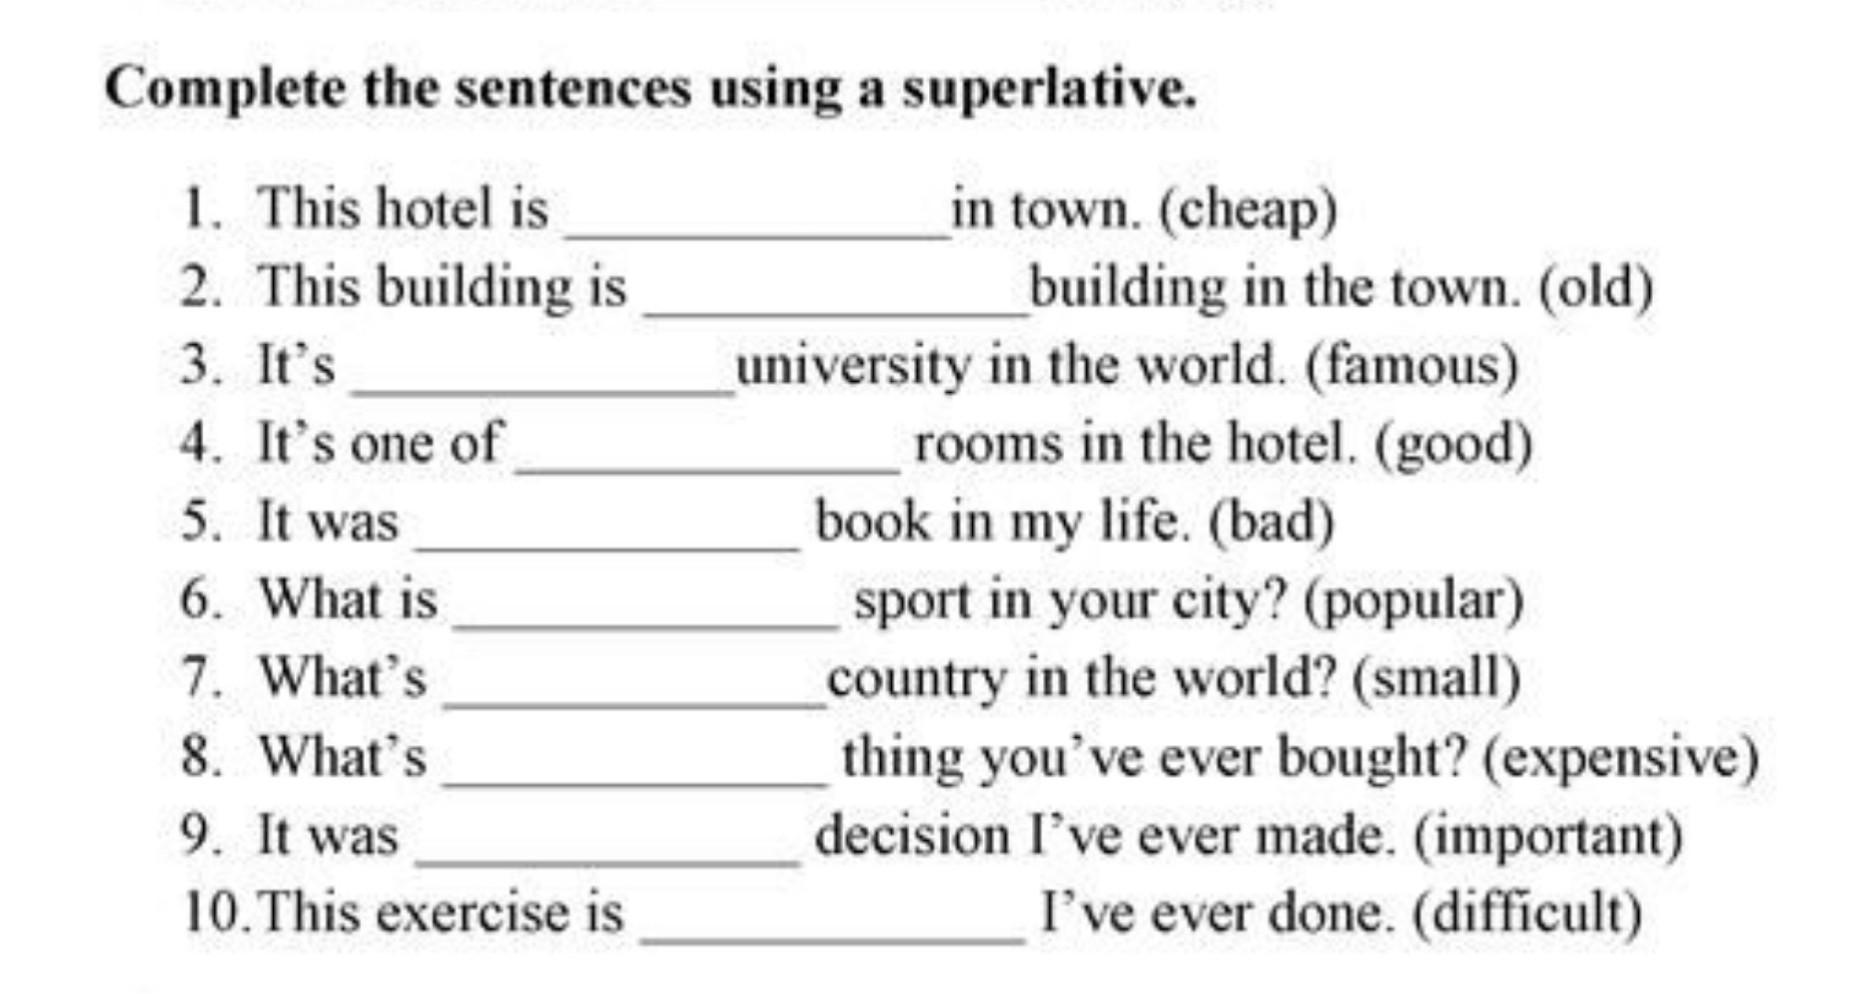 Complete the sentences and use superlative